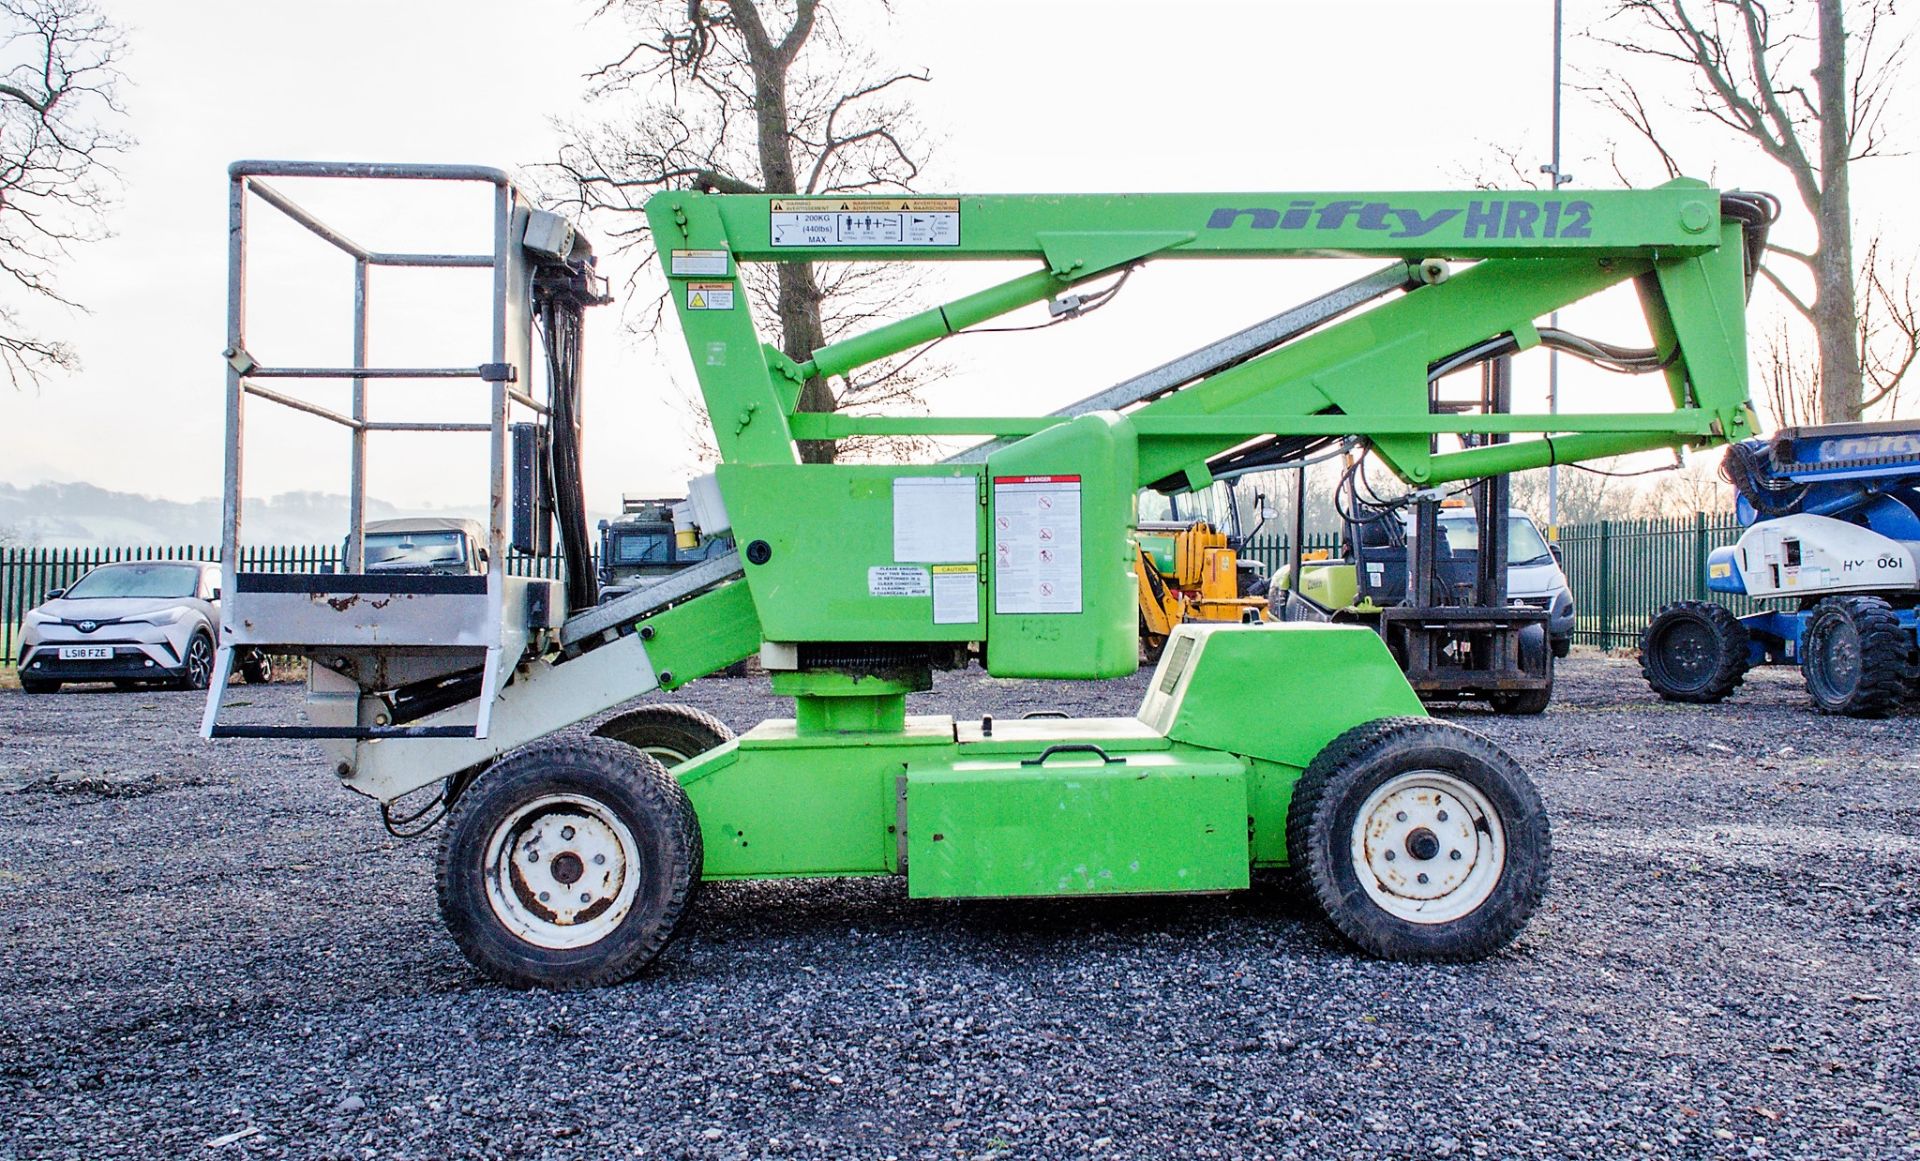 Nifty HR12 battery electric/diesel articulated boom lift access platform Year: 2007 S/N: 16530 SHC - Image 7 of 18